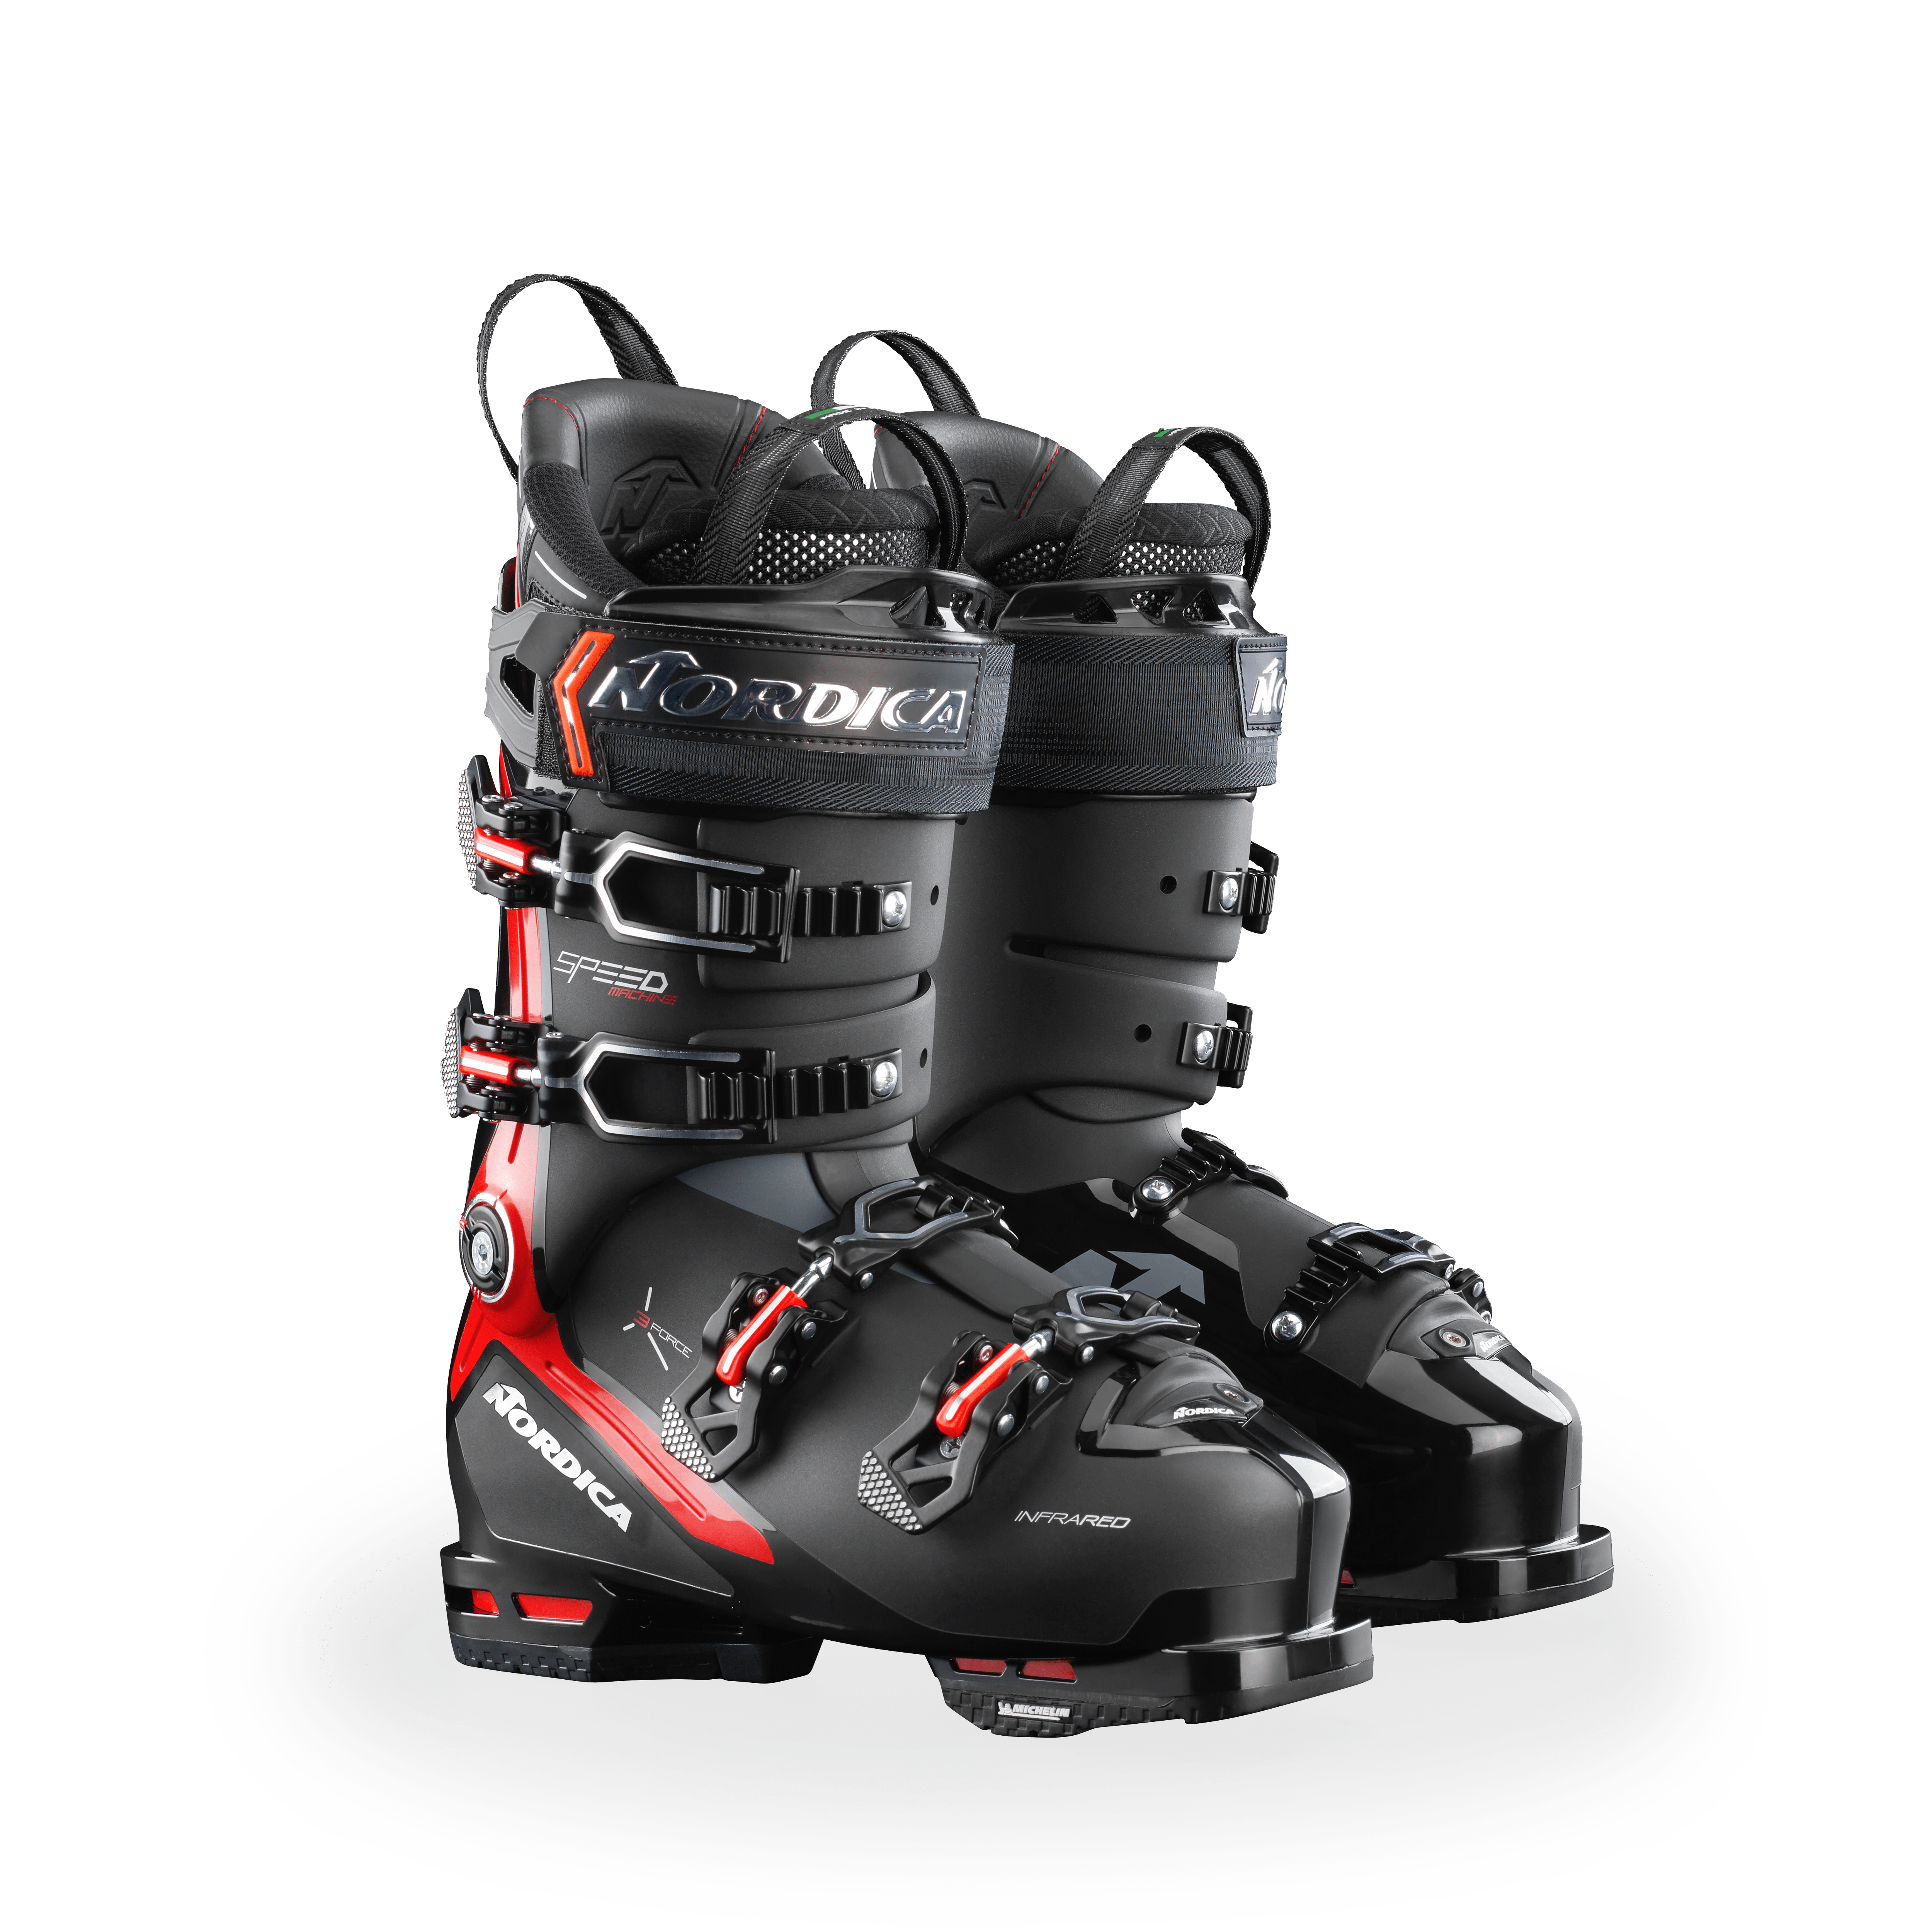 SPEEDMACHINE 3 130 S (GW) Nordica - Skis and Boots – Official website